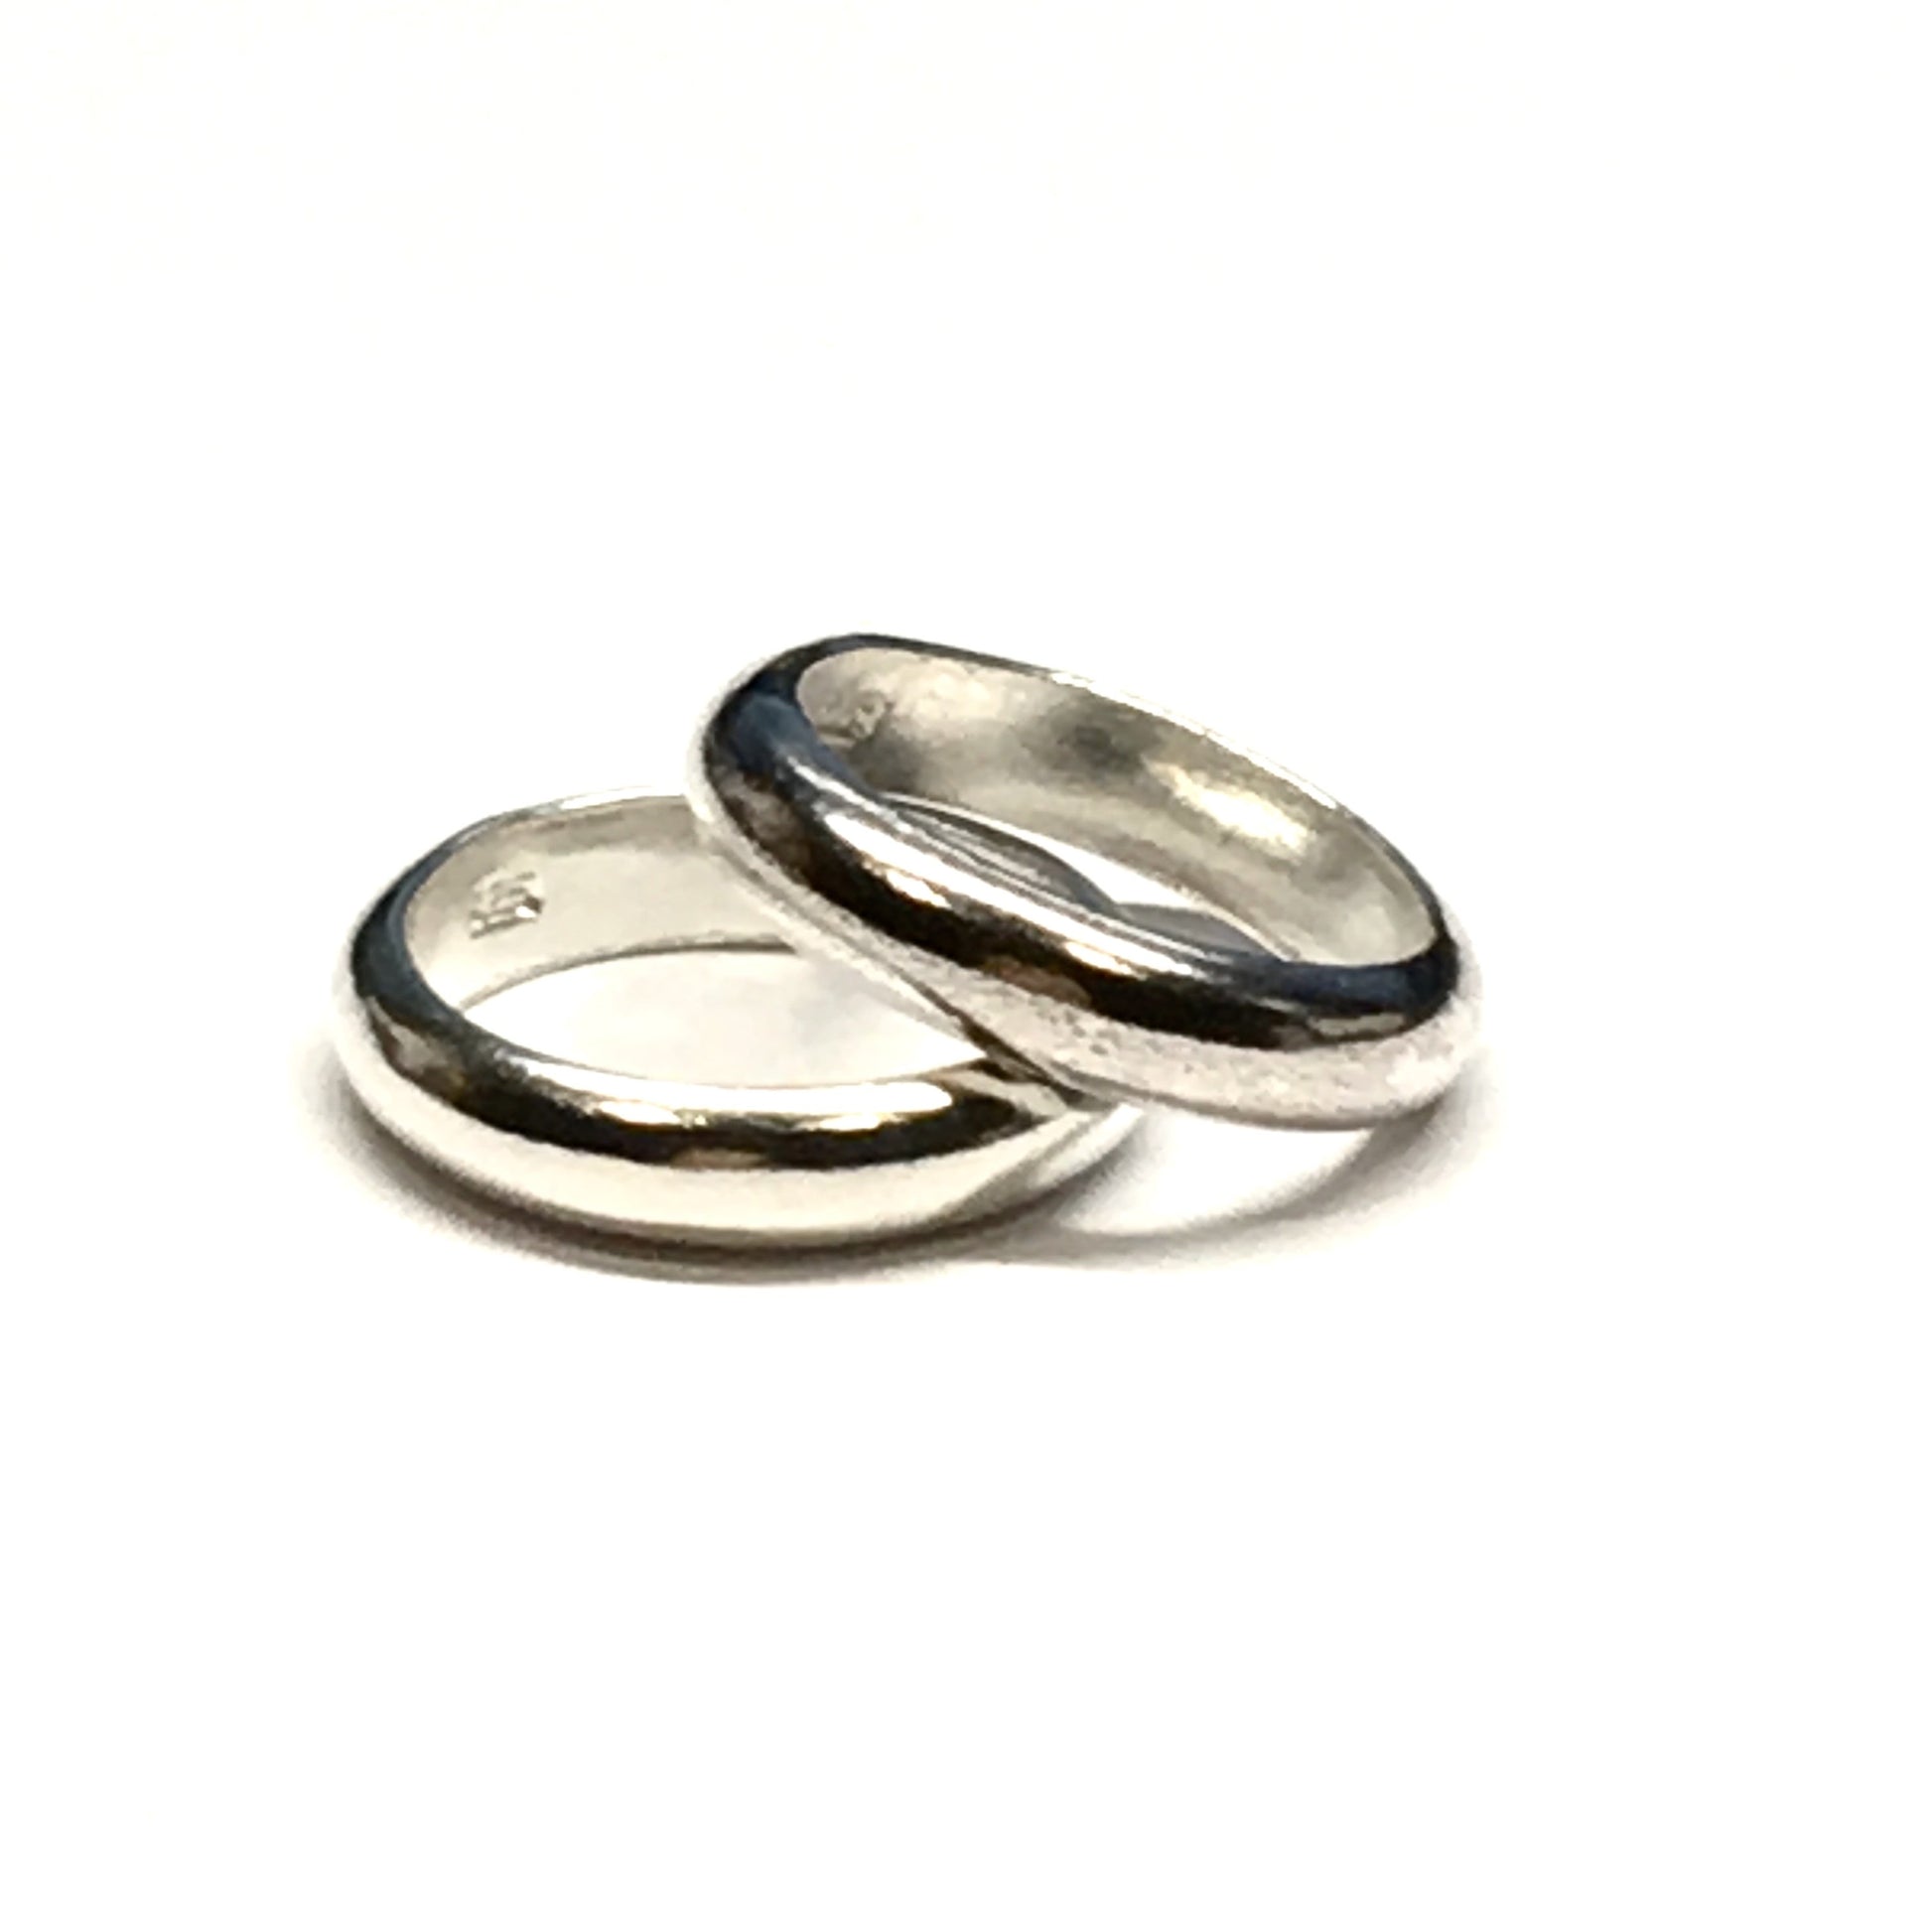 Buy Charms - Bridesmaid Gifts - Set of 2 Wedding Ring Charms Sterling Silver Plain Band - Blingschlingers Jewelry Online